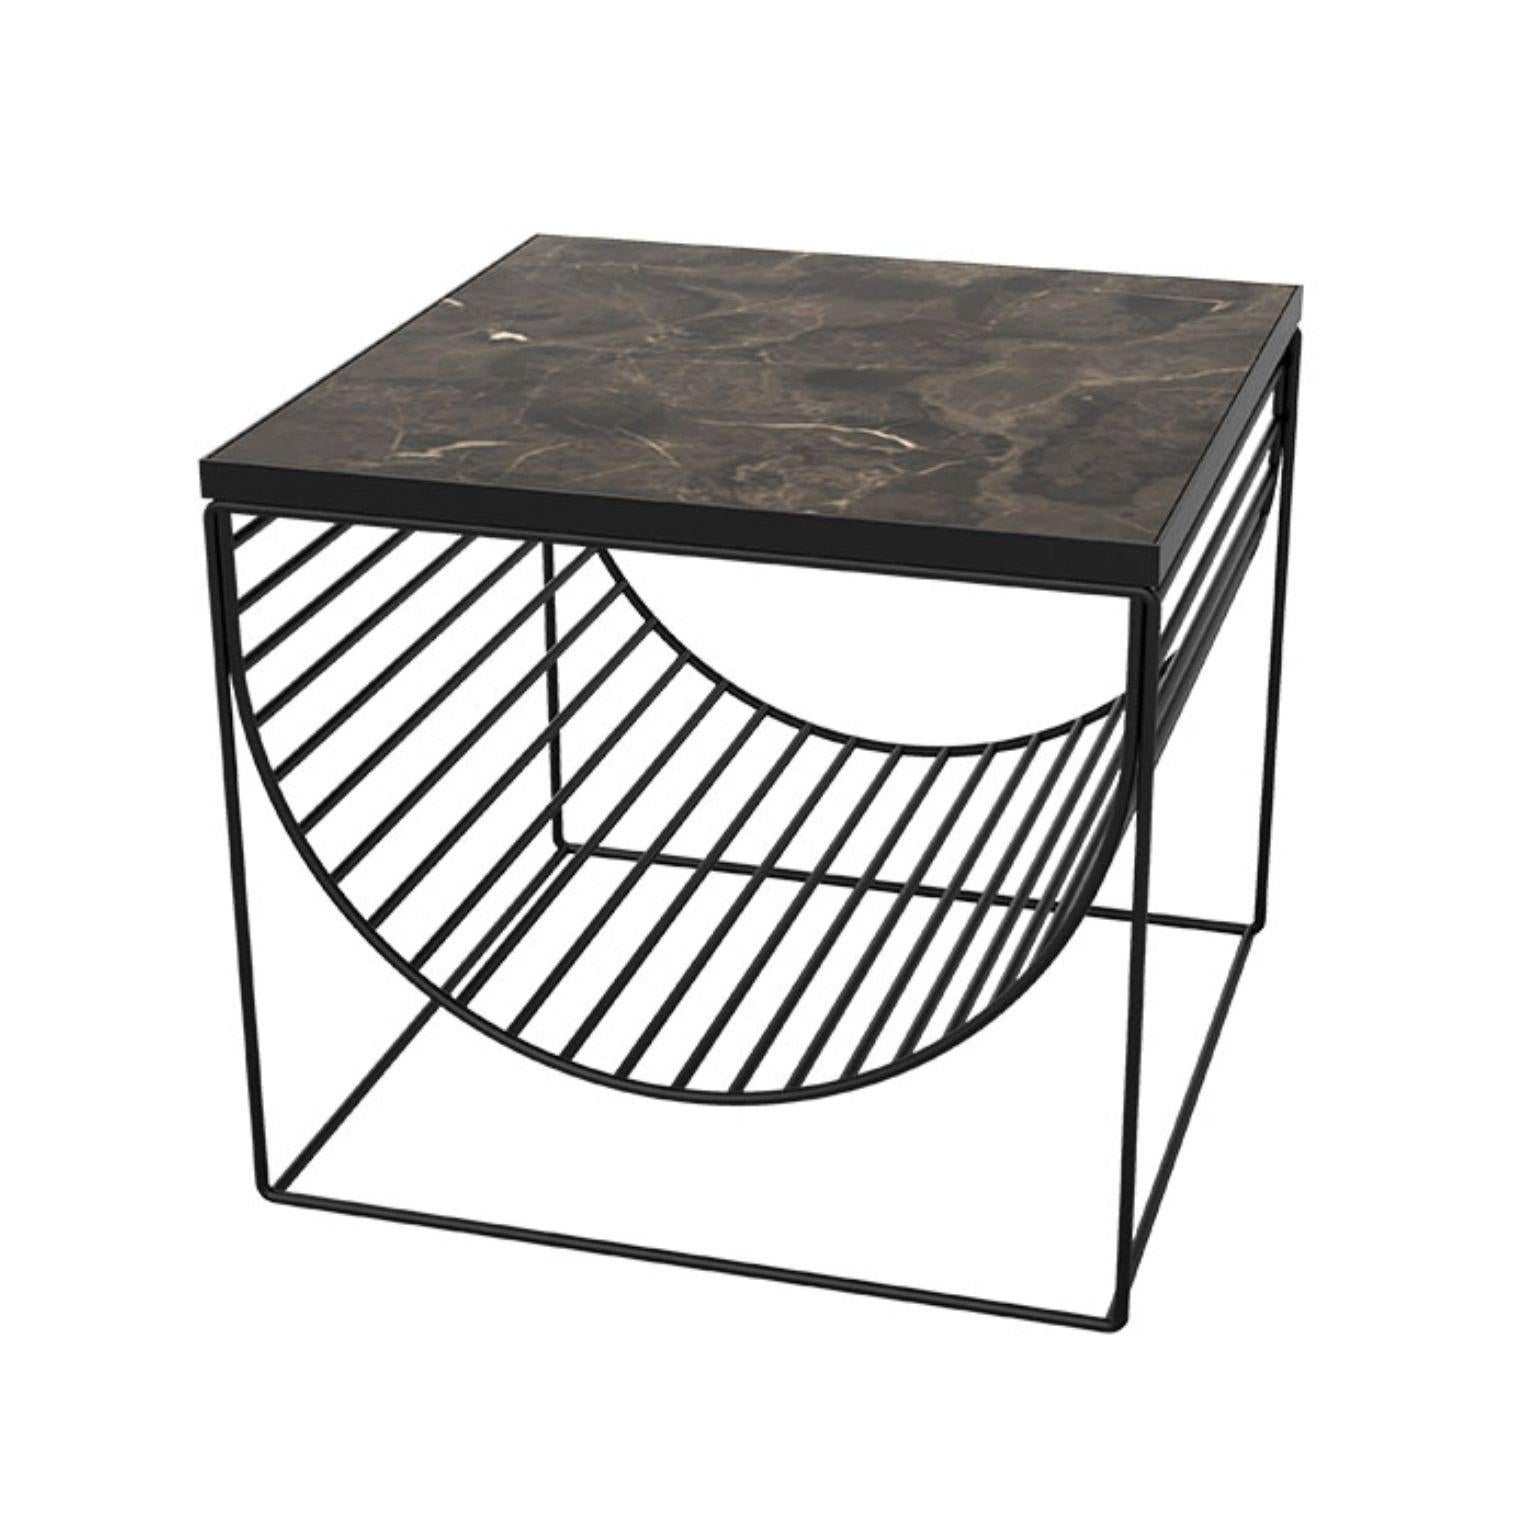 Black marble and black steel side table.
Dimensions: L 50 x W 50 x H 44.3 cm
Materials: Marble and steel

This series consists of three different designs that you can combine in many different ways. The table tops come in two different colored